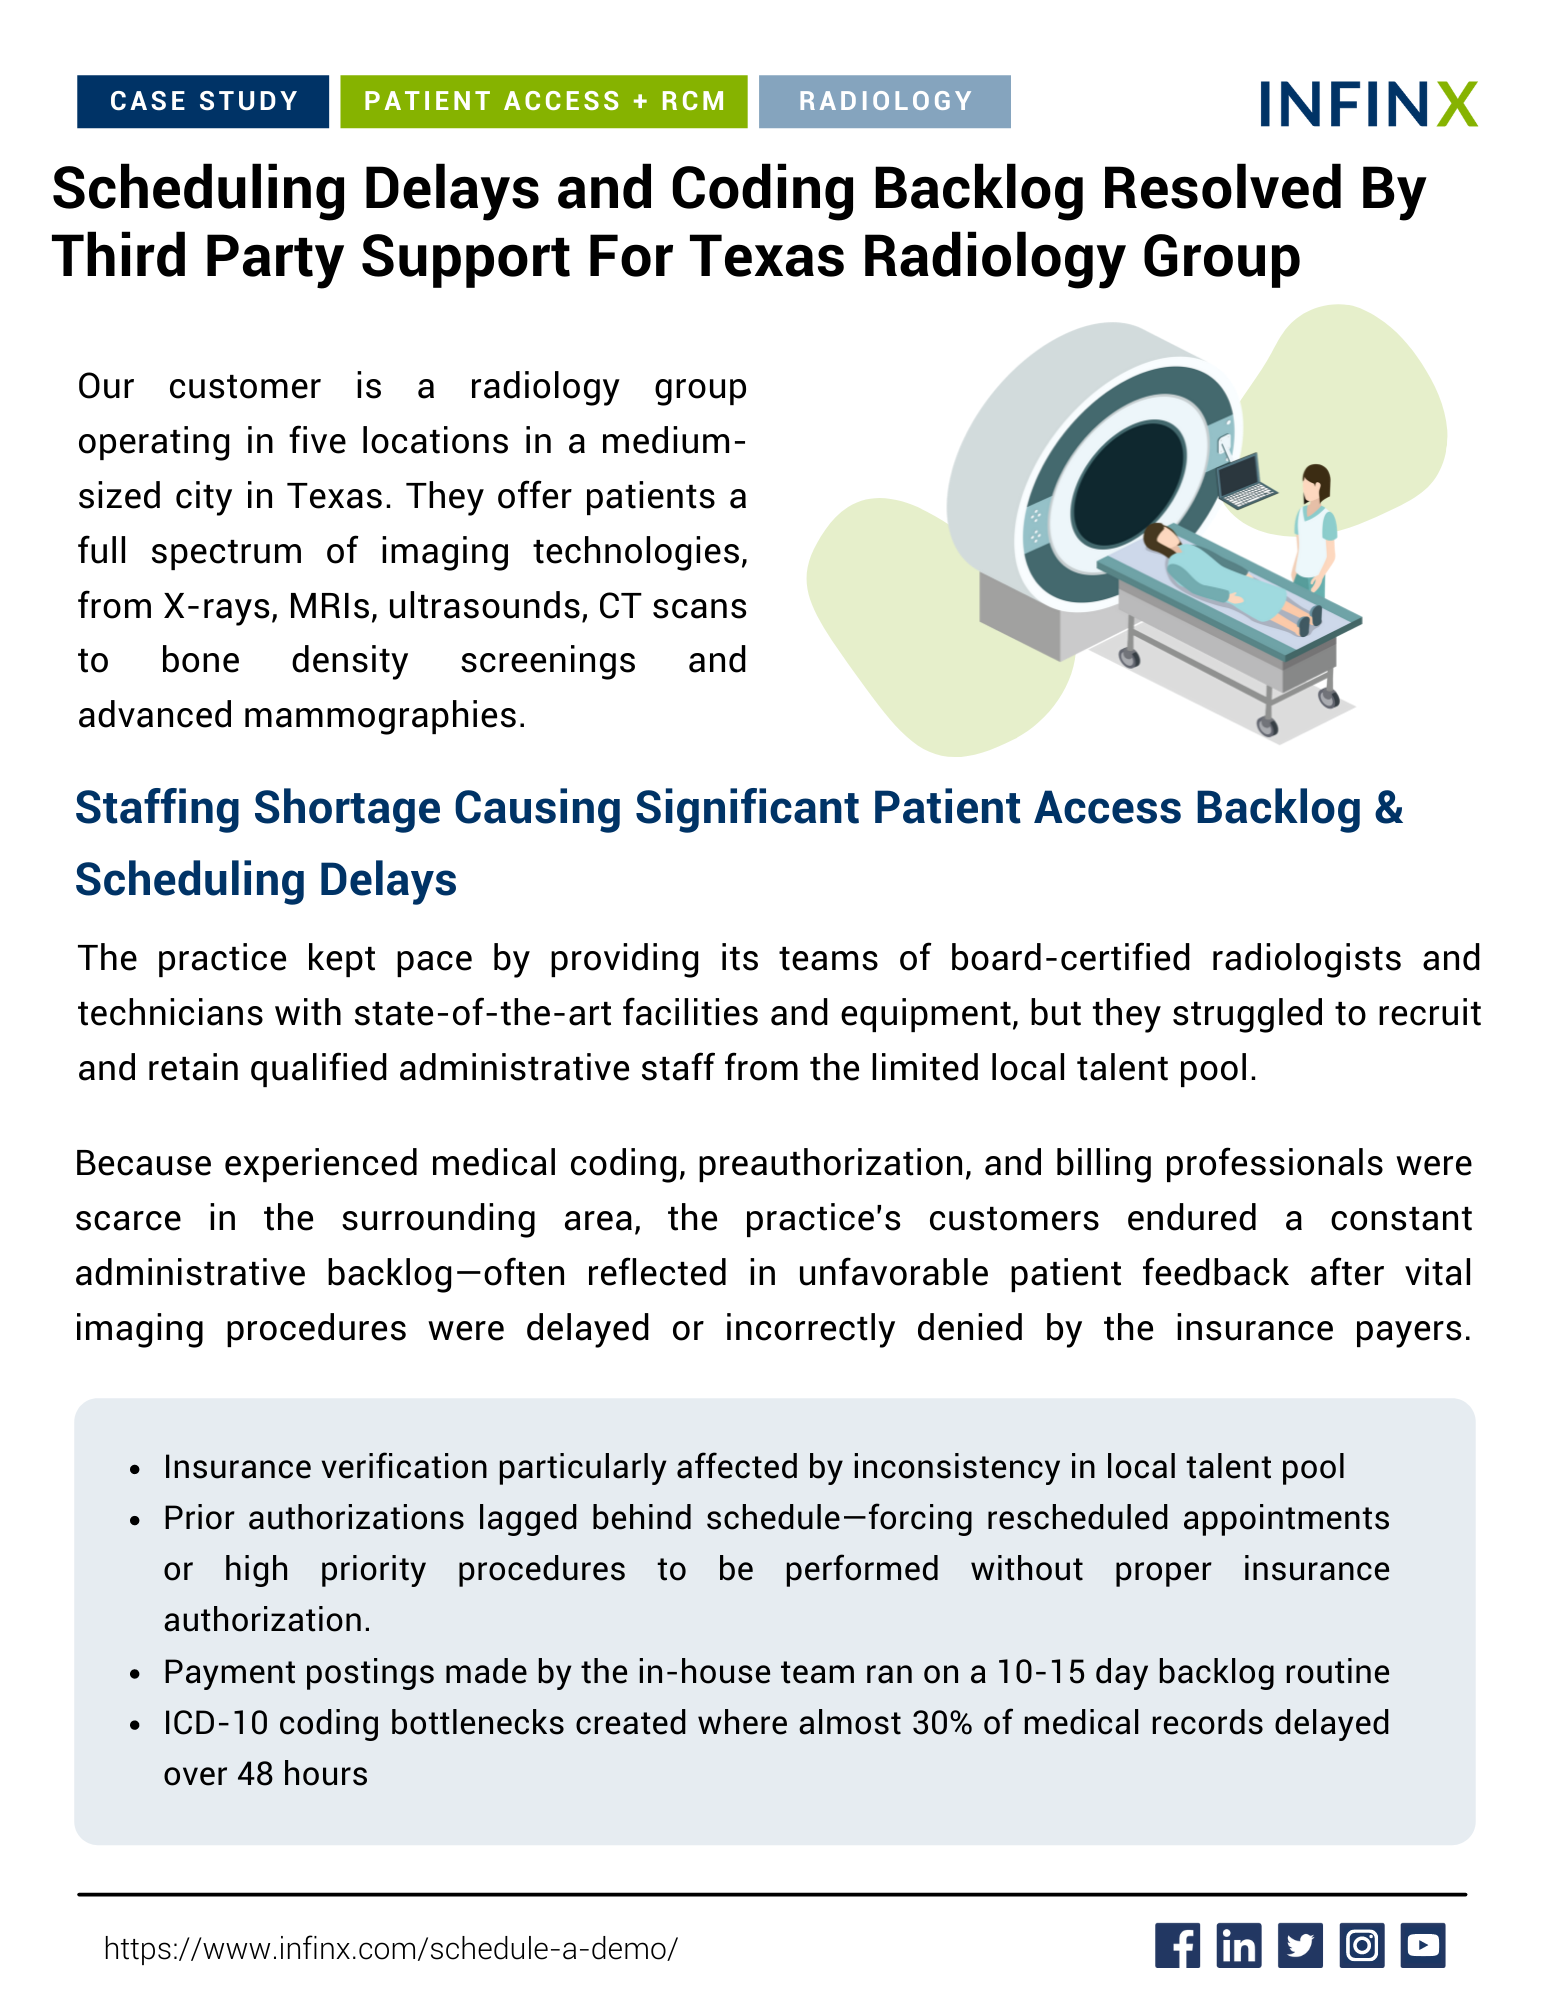 Infinx - Case Study - Scheduling Delays and Coding Backlog Resolved By Third Party Support For Texas Radiology ​Group - 1